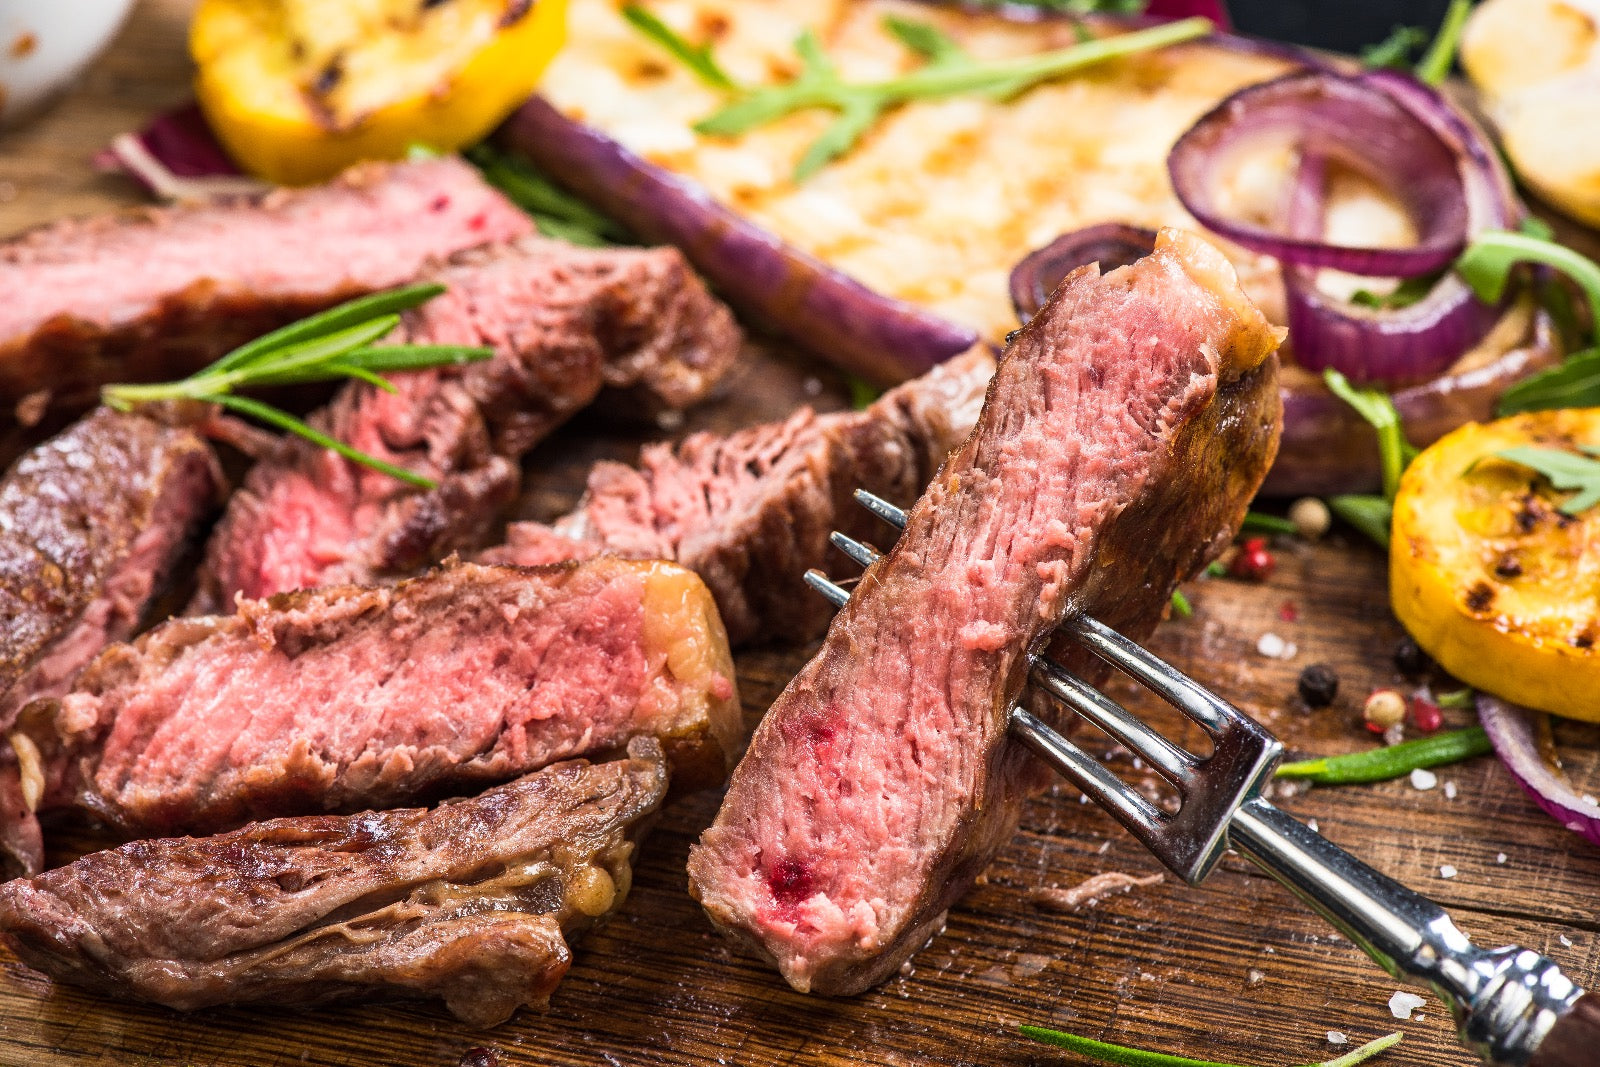 An Iconic Cut Of Meat Well Loved By Steak Connoisseurs - Beck & Bulow